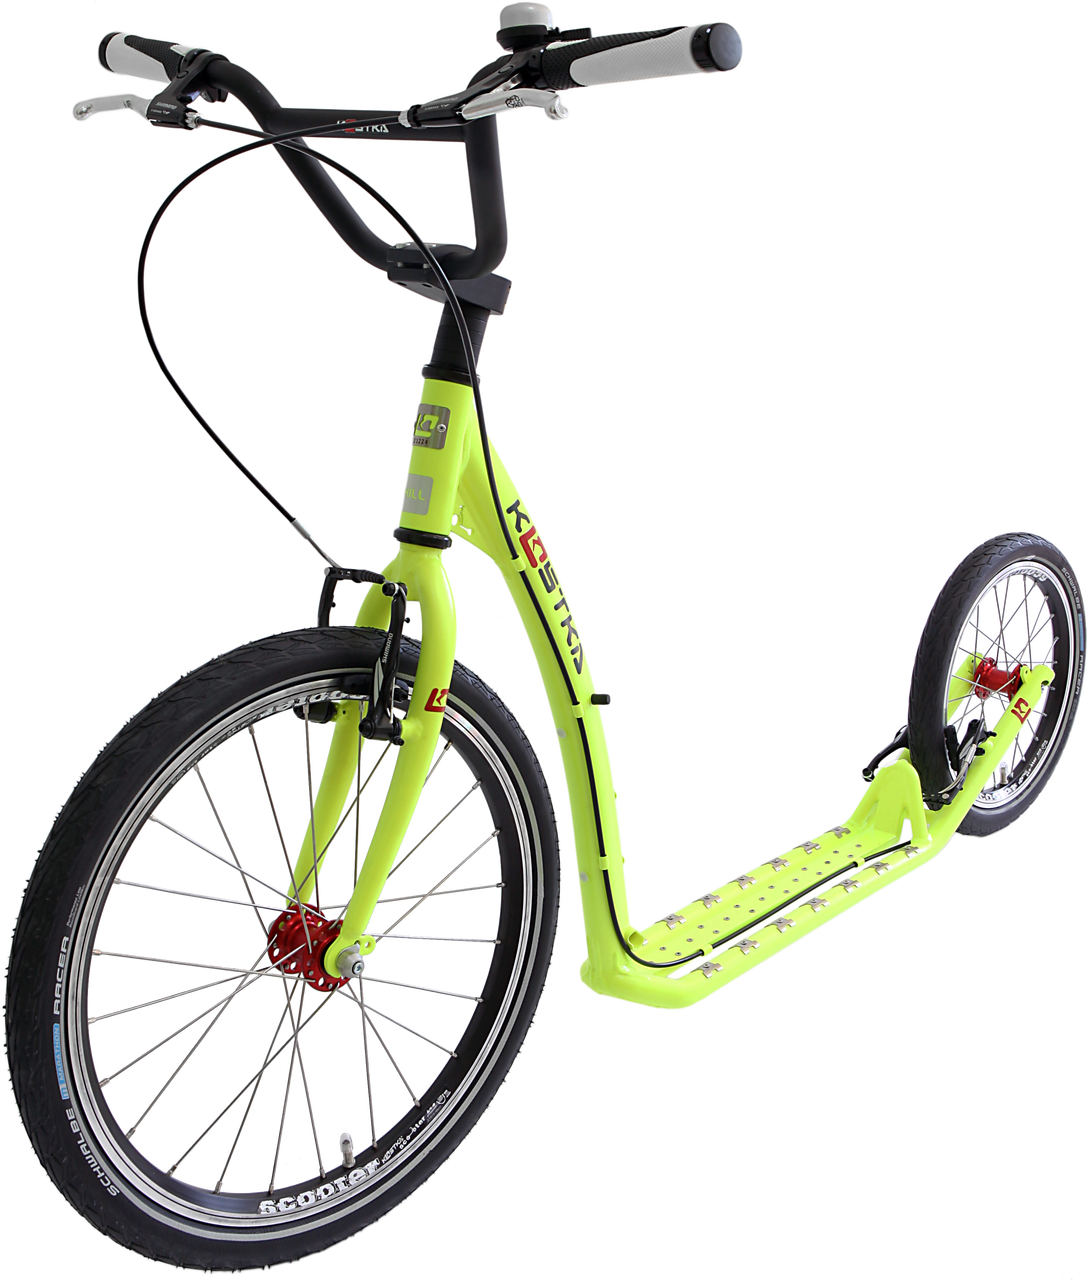 Kick scooter PNG images 